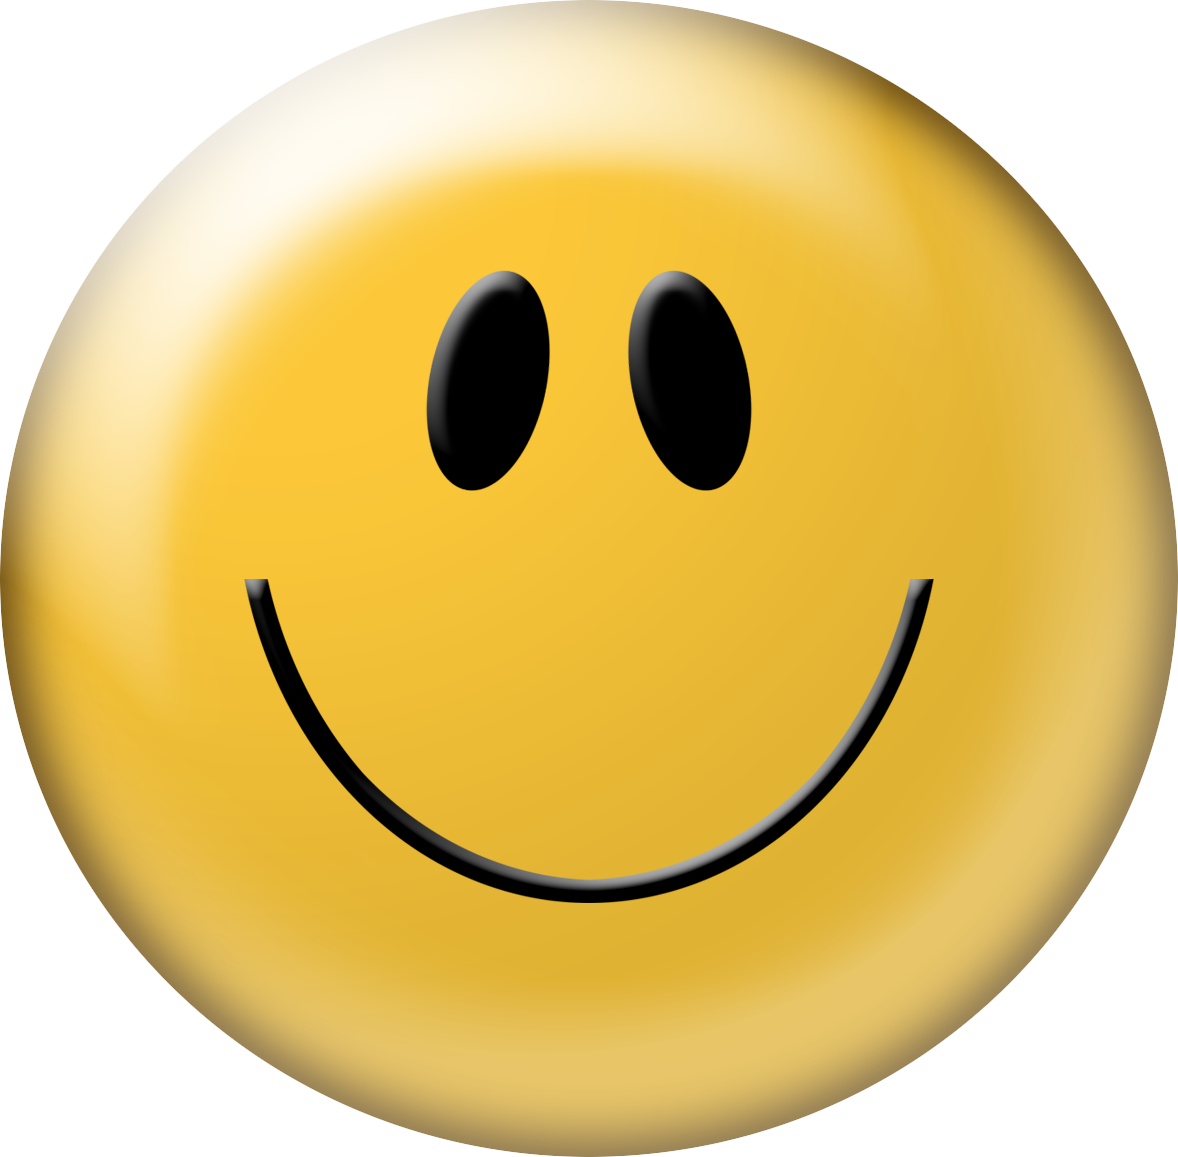 File:Emoticon Face Smiley GE.png - Wikimedia Commons